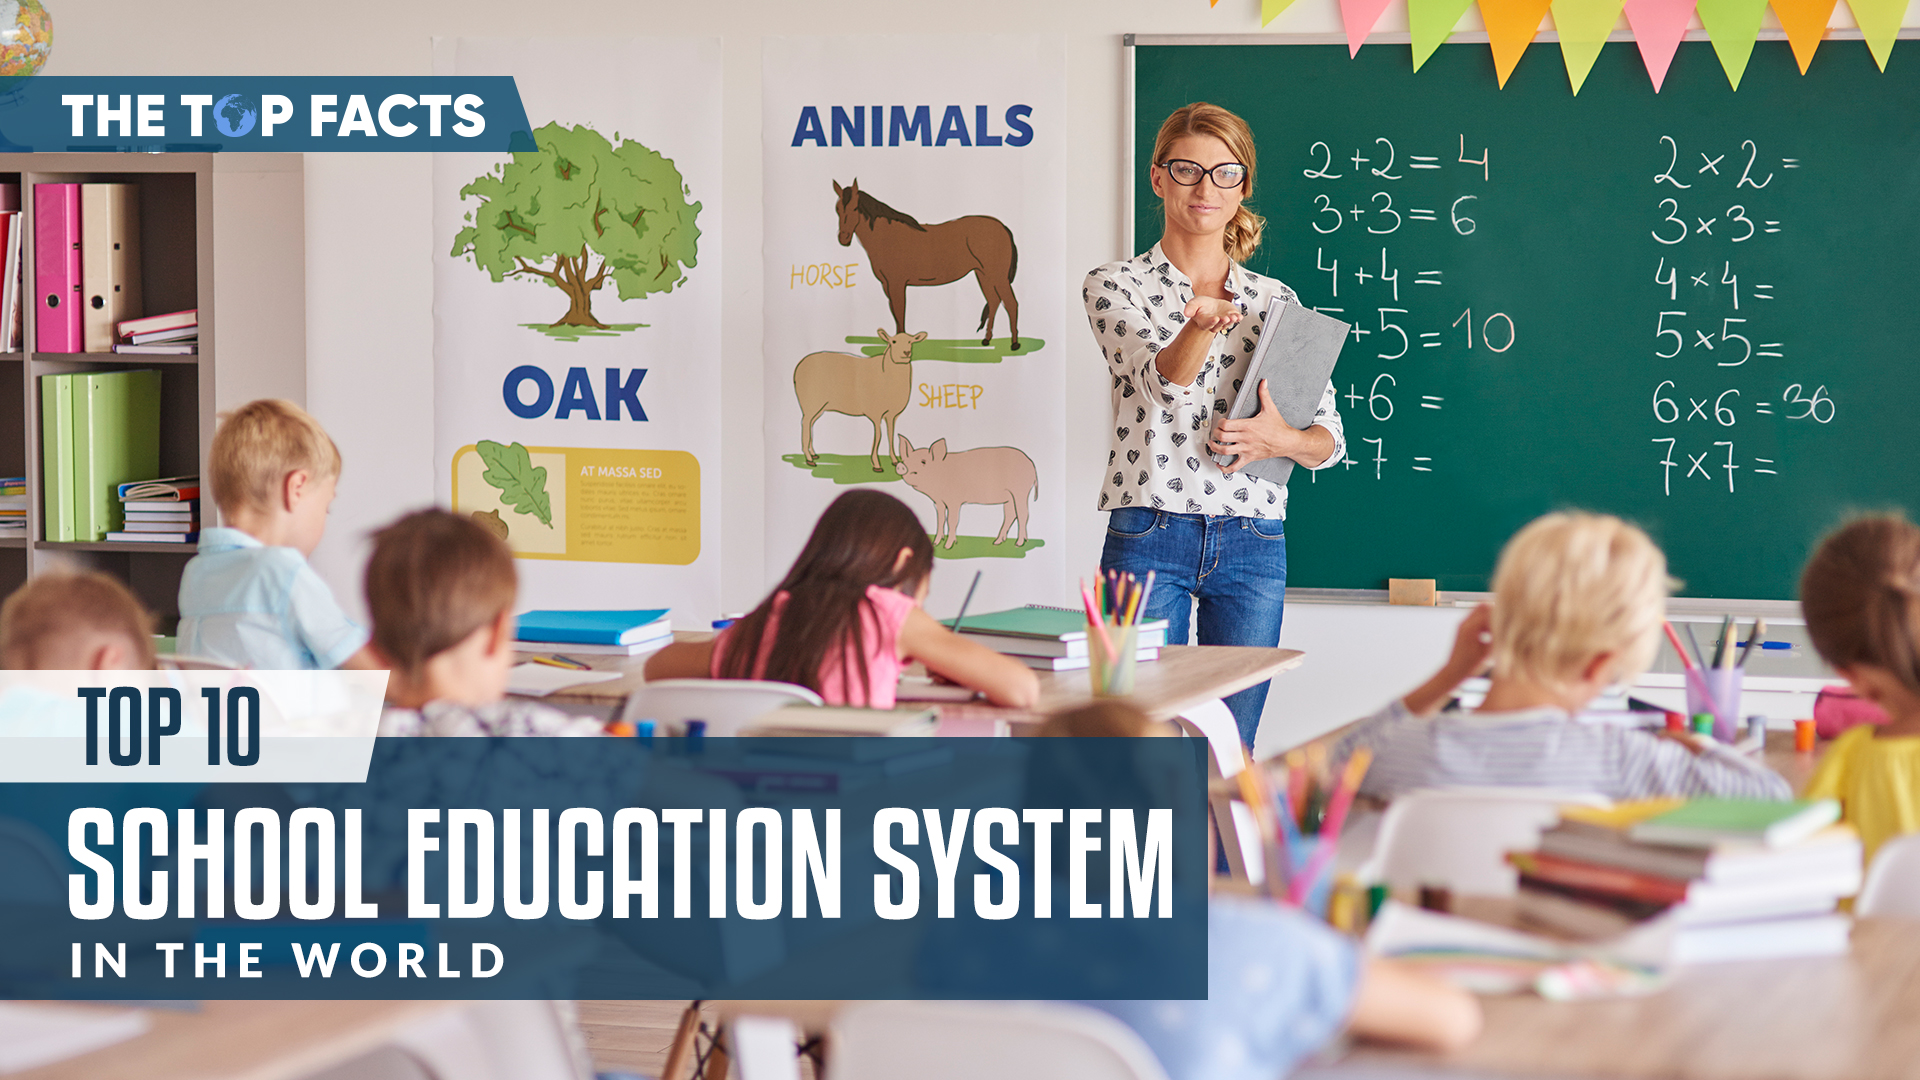 Top 10 School Education System In The World